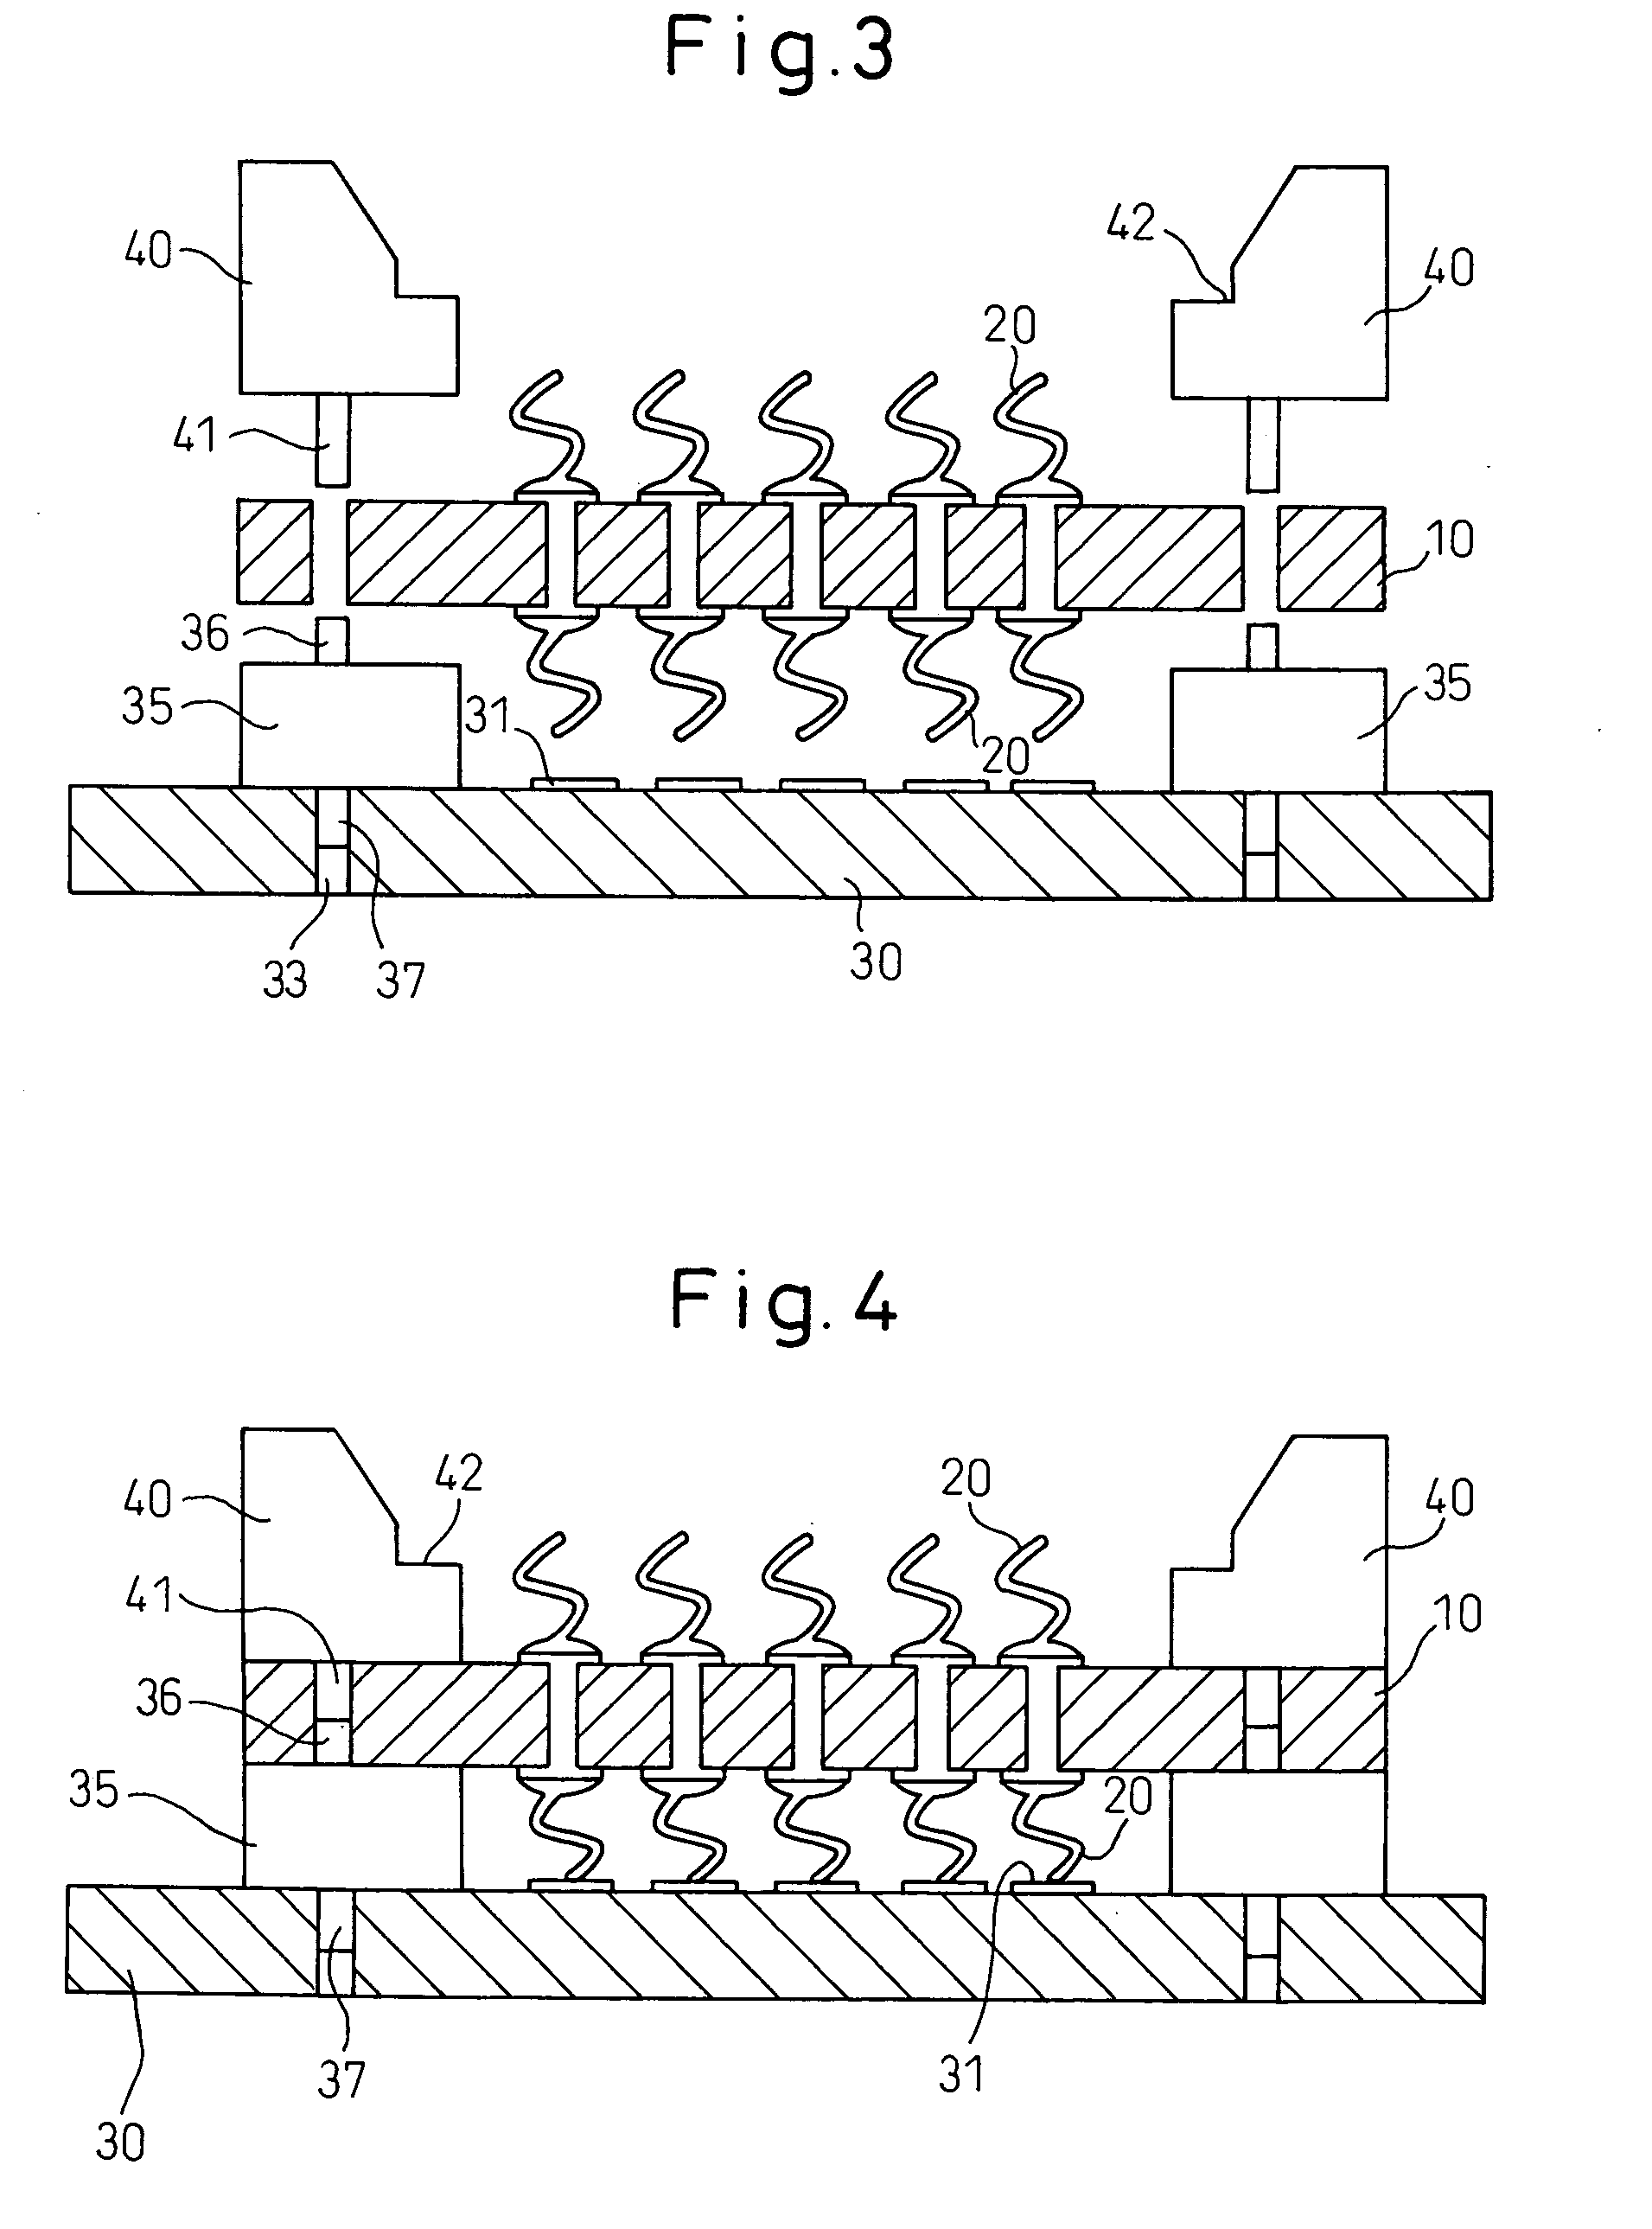 Semiconductor device having external contact terminals and method for using the same